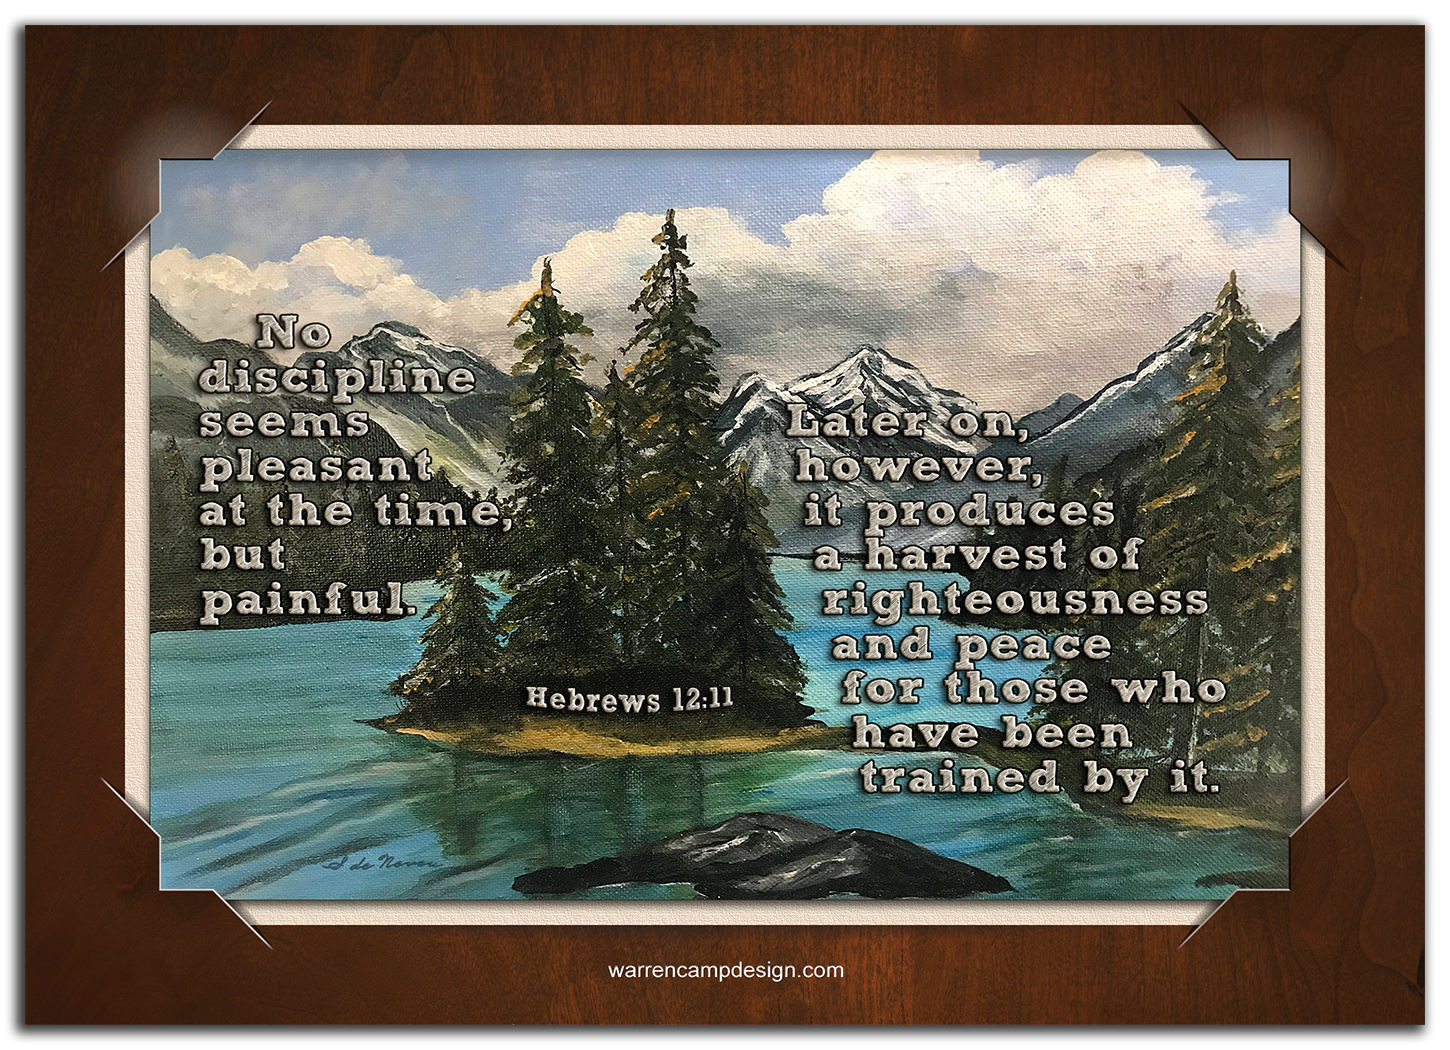 Scripture picture of Hebrews 12:11, emphasizing the eventual production of righteousness and peace when God disciplines us.